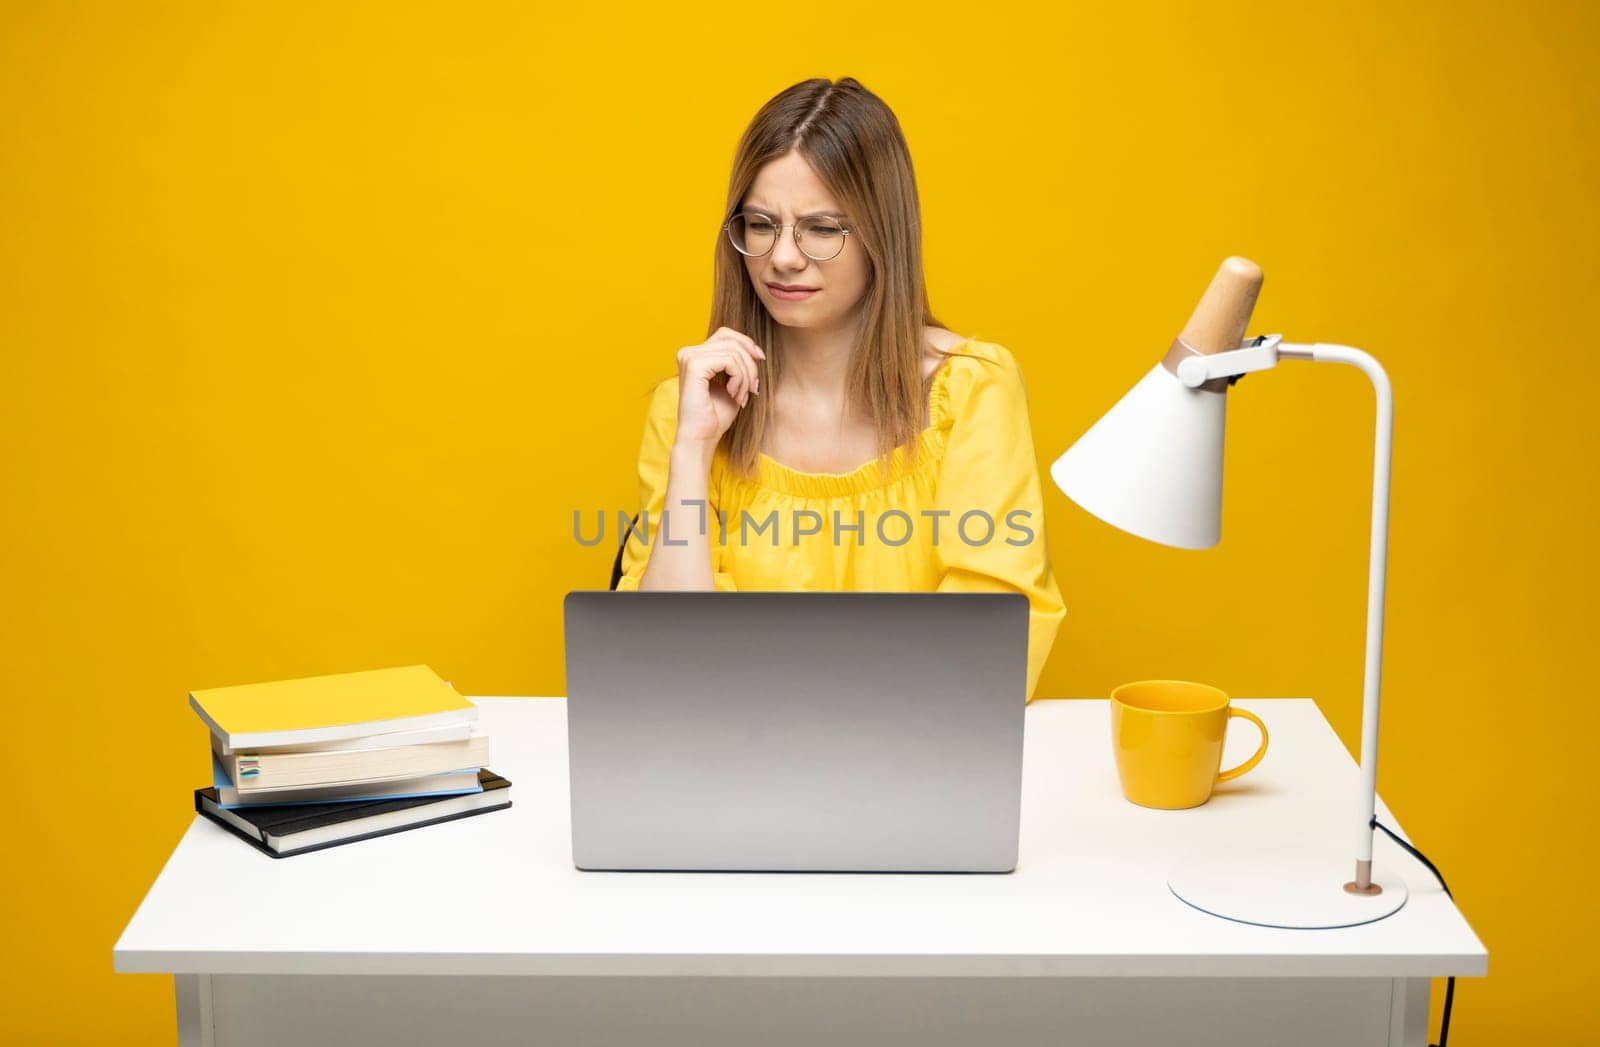 Frustrated, sad, stressed or depressed woman feeling tired while working with a laptop on a black background. by vovsht